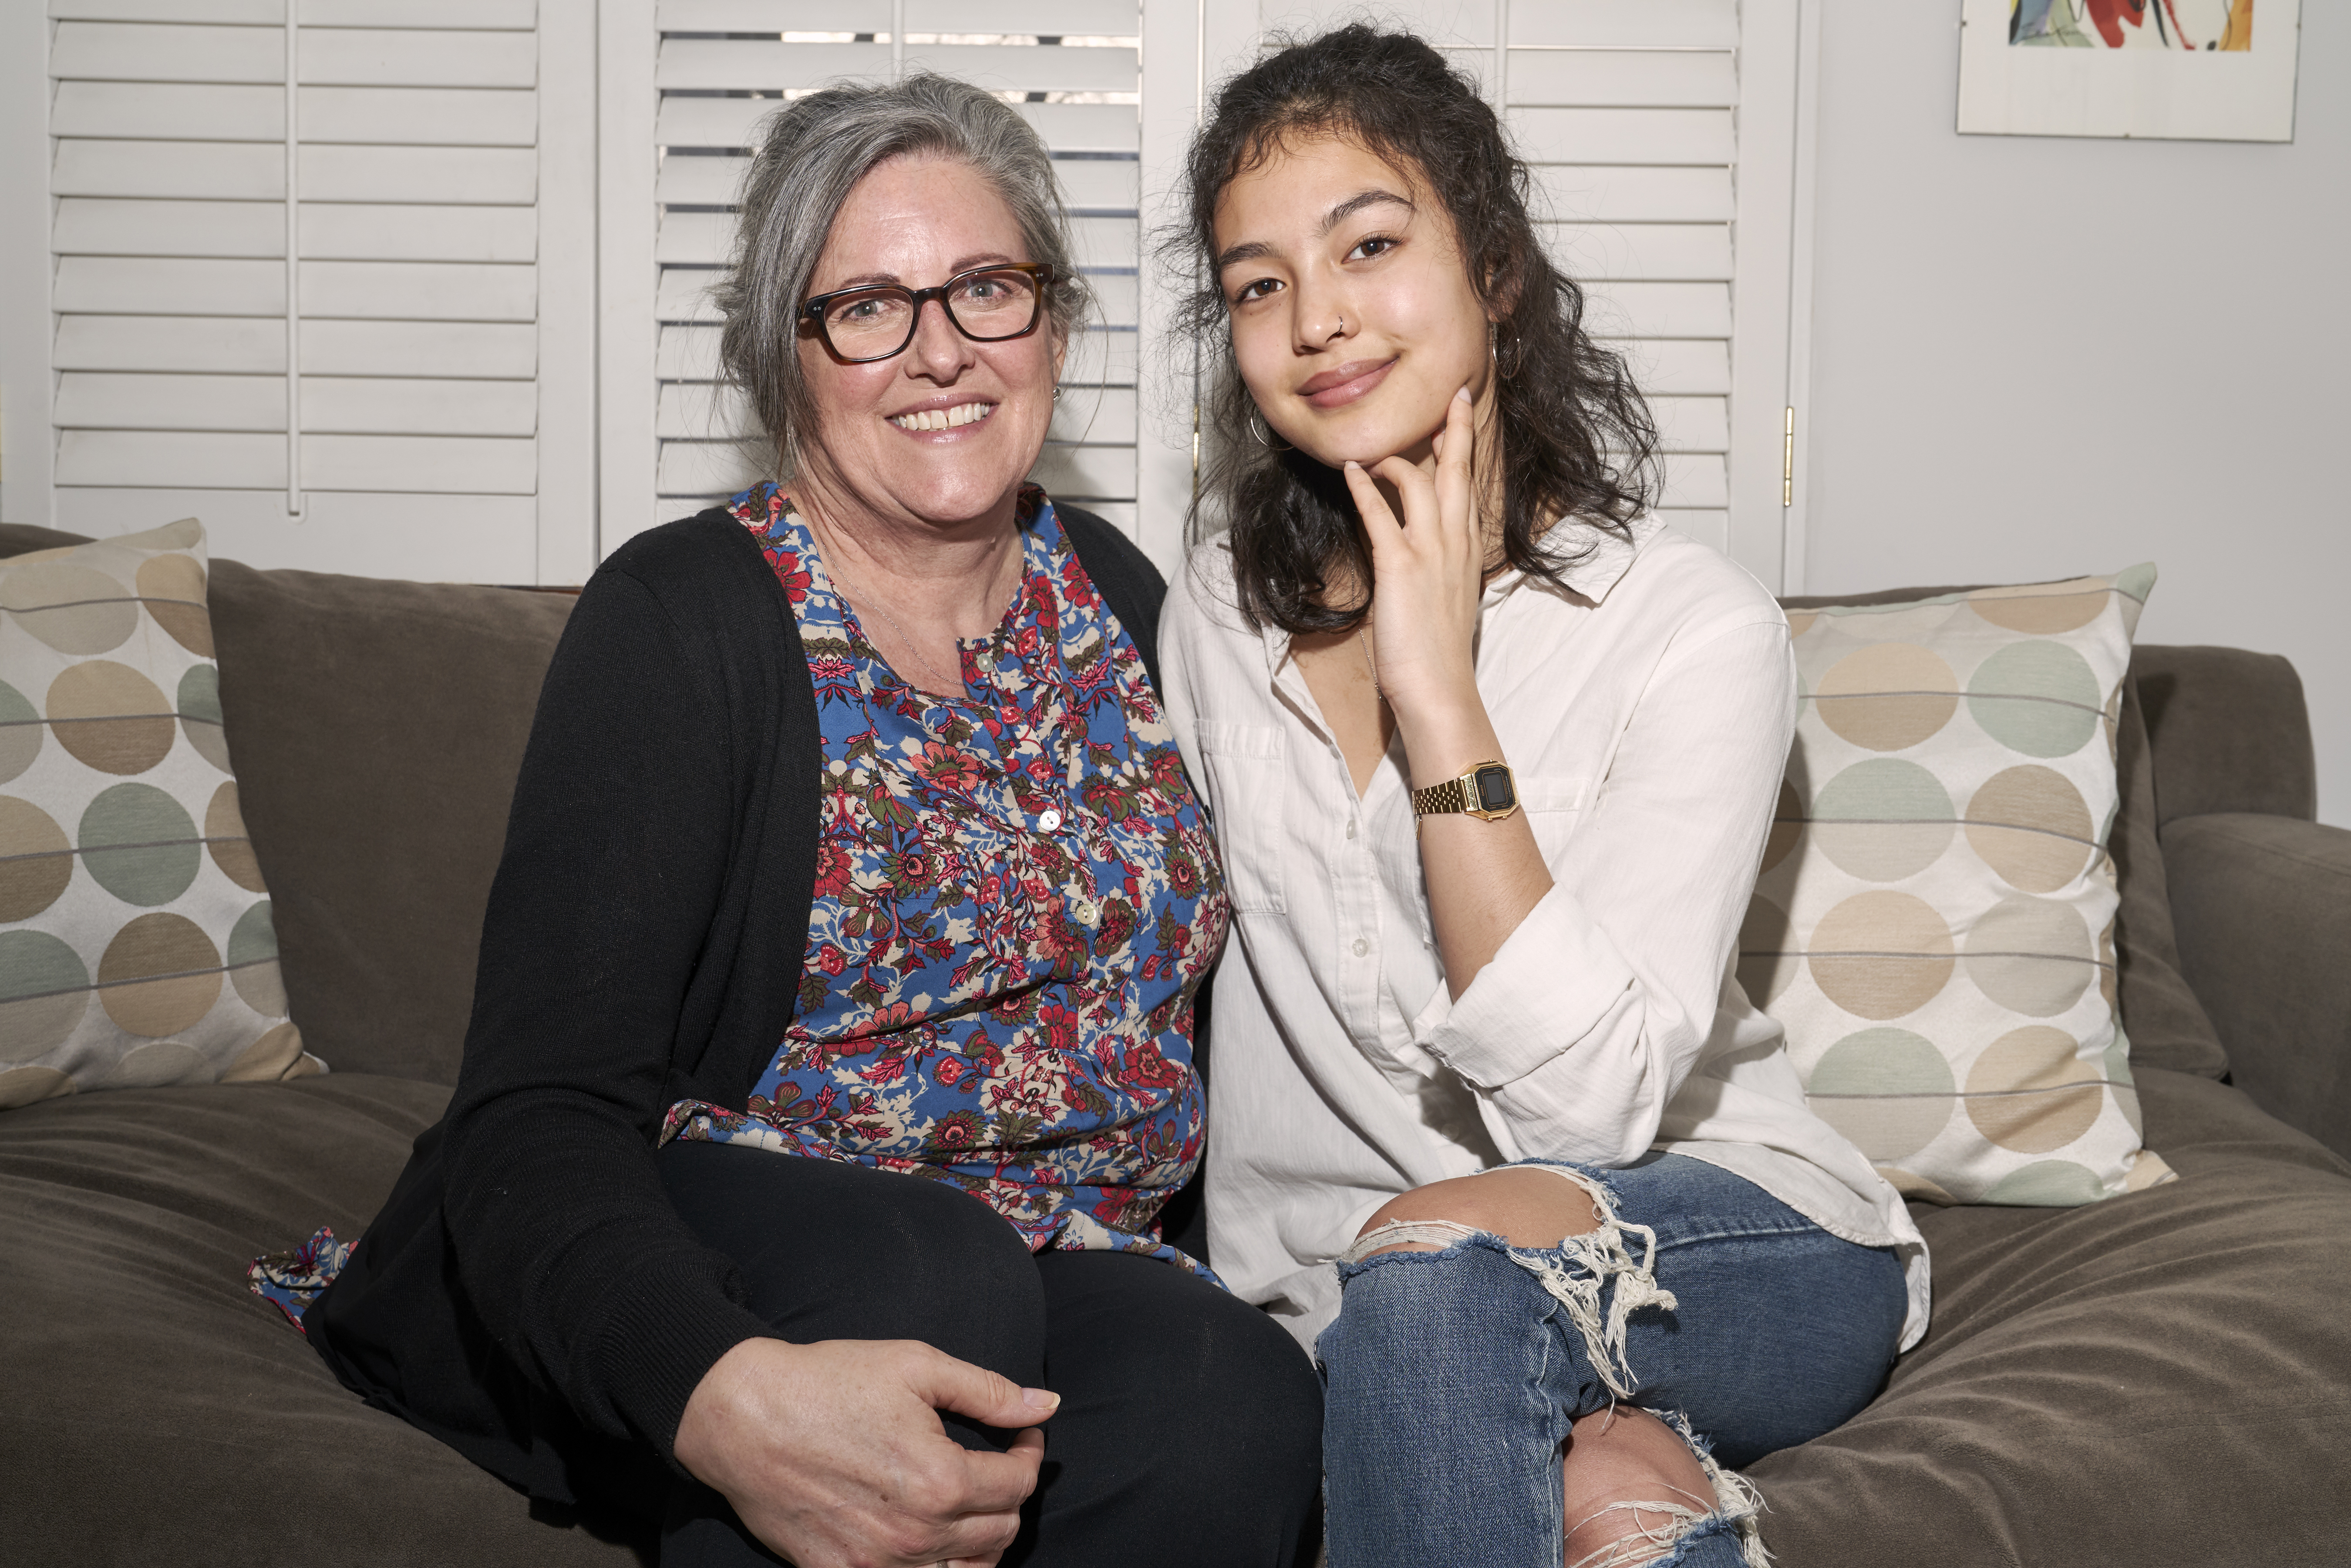 Roommates Catherine Finlayson, 61 (left) and 18-year old U of T student Zoe Butcher (right) are part of the Toronto HomeShare Pilot Project where university students are paired with senior-citizens who have a spare room in their homes. Students are expected to help out around the house doing chores and light housework in return for subsidized rent